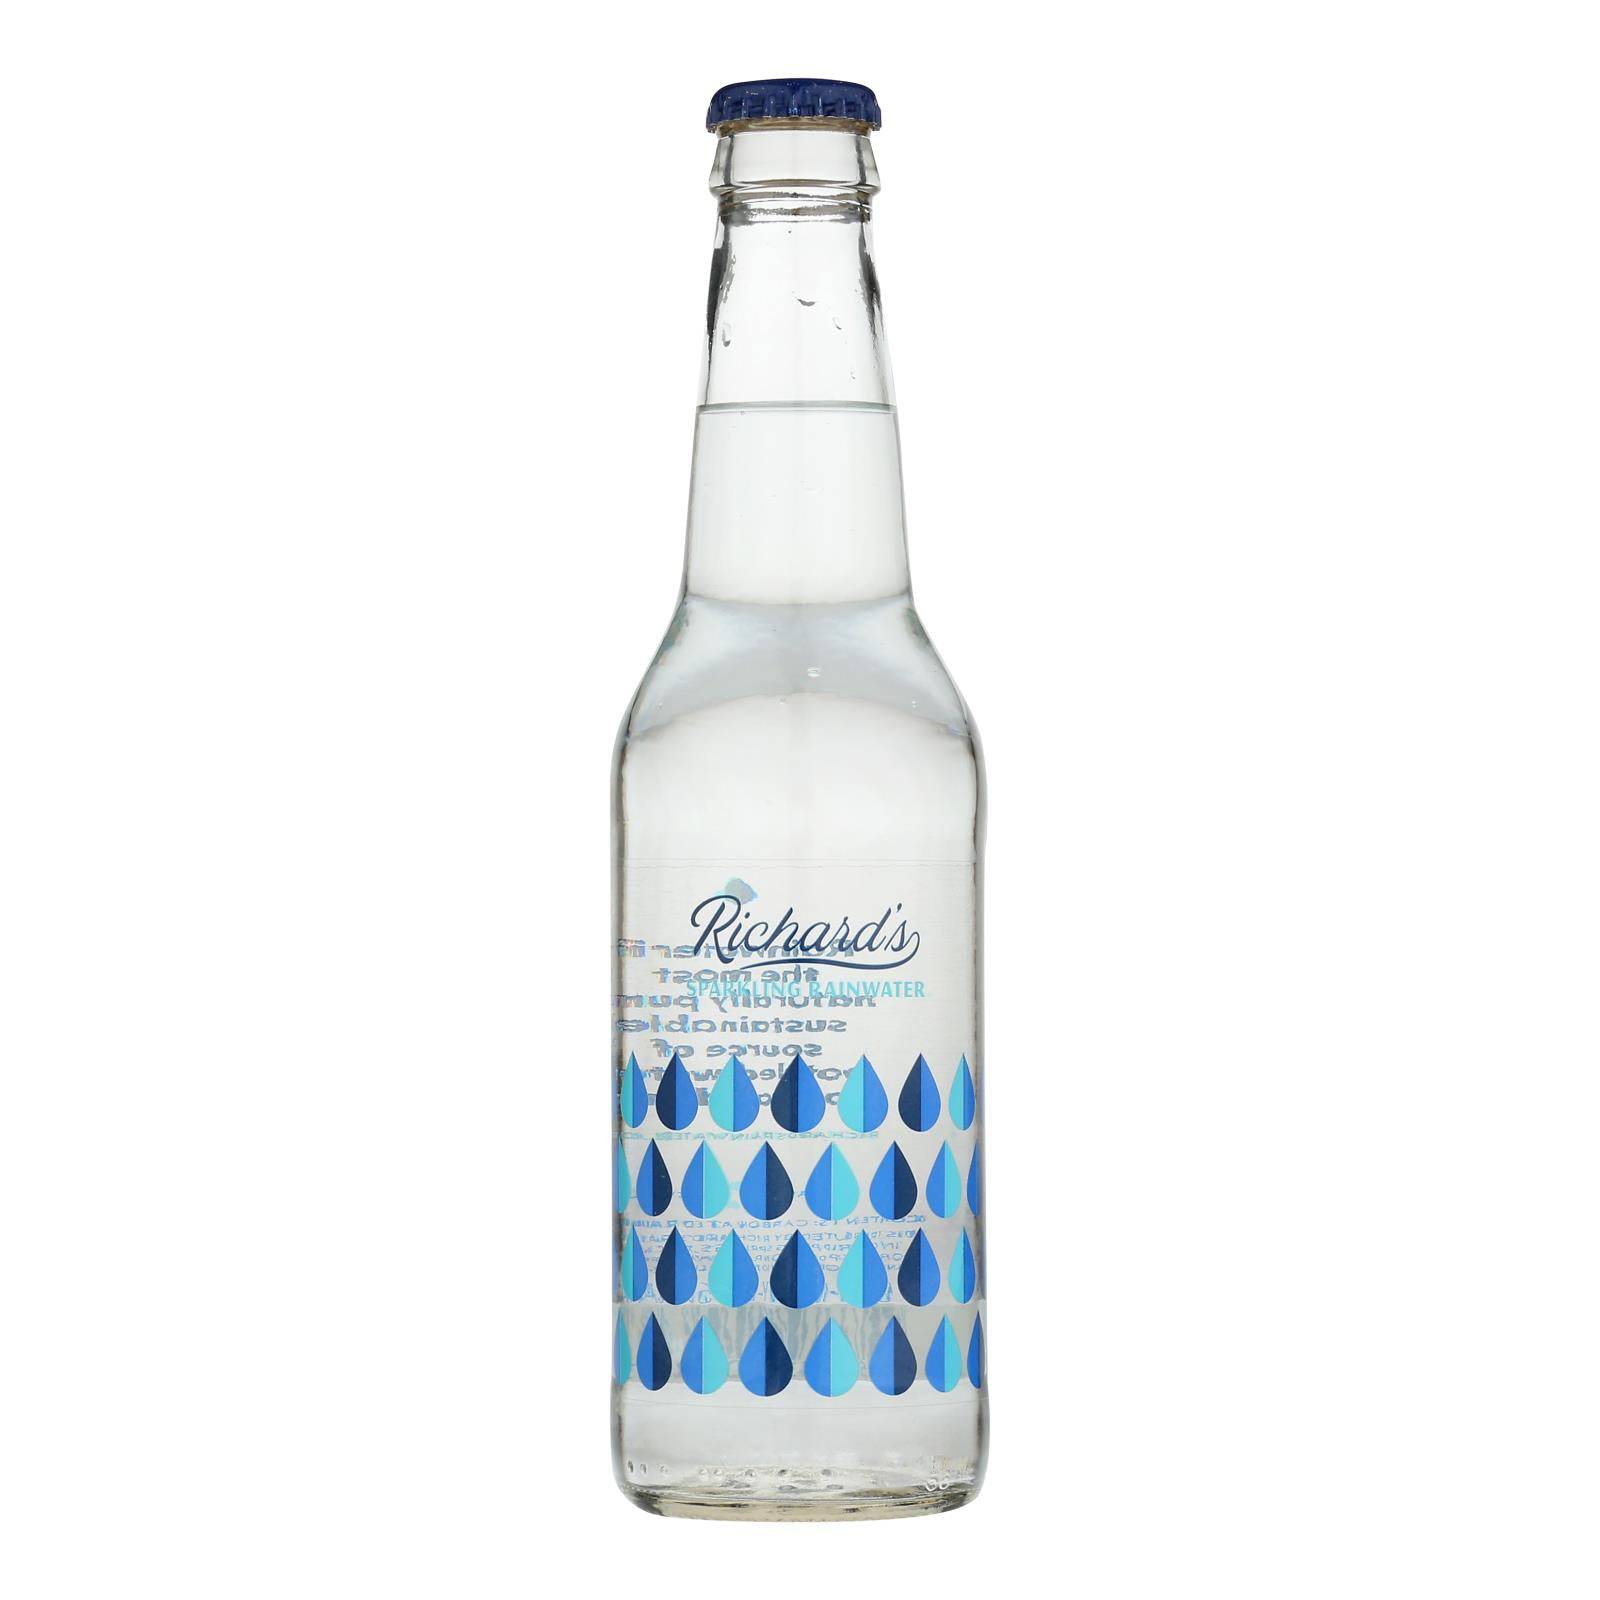 Just Water - 500 Ml - Case of 12 - 500 ml